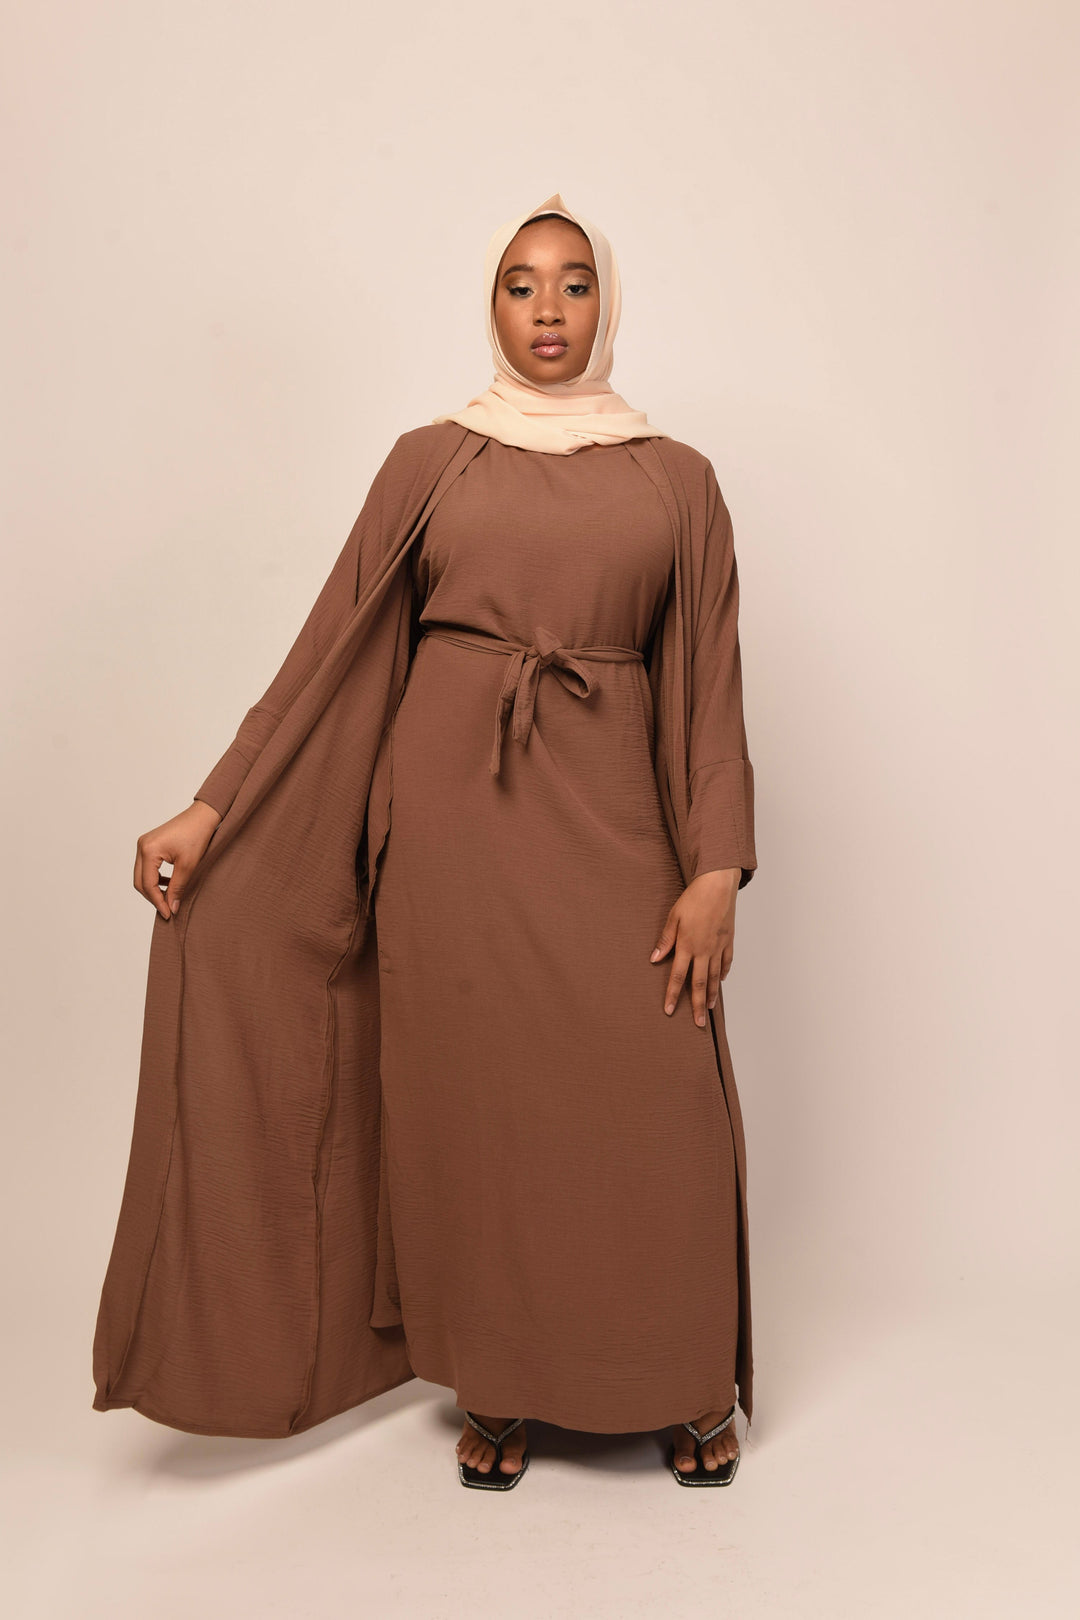 Get trendy with Lea 2-Piece Abaya Set - Brown -  available at Voilee NY. Grab yours for $74.90 today!